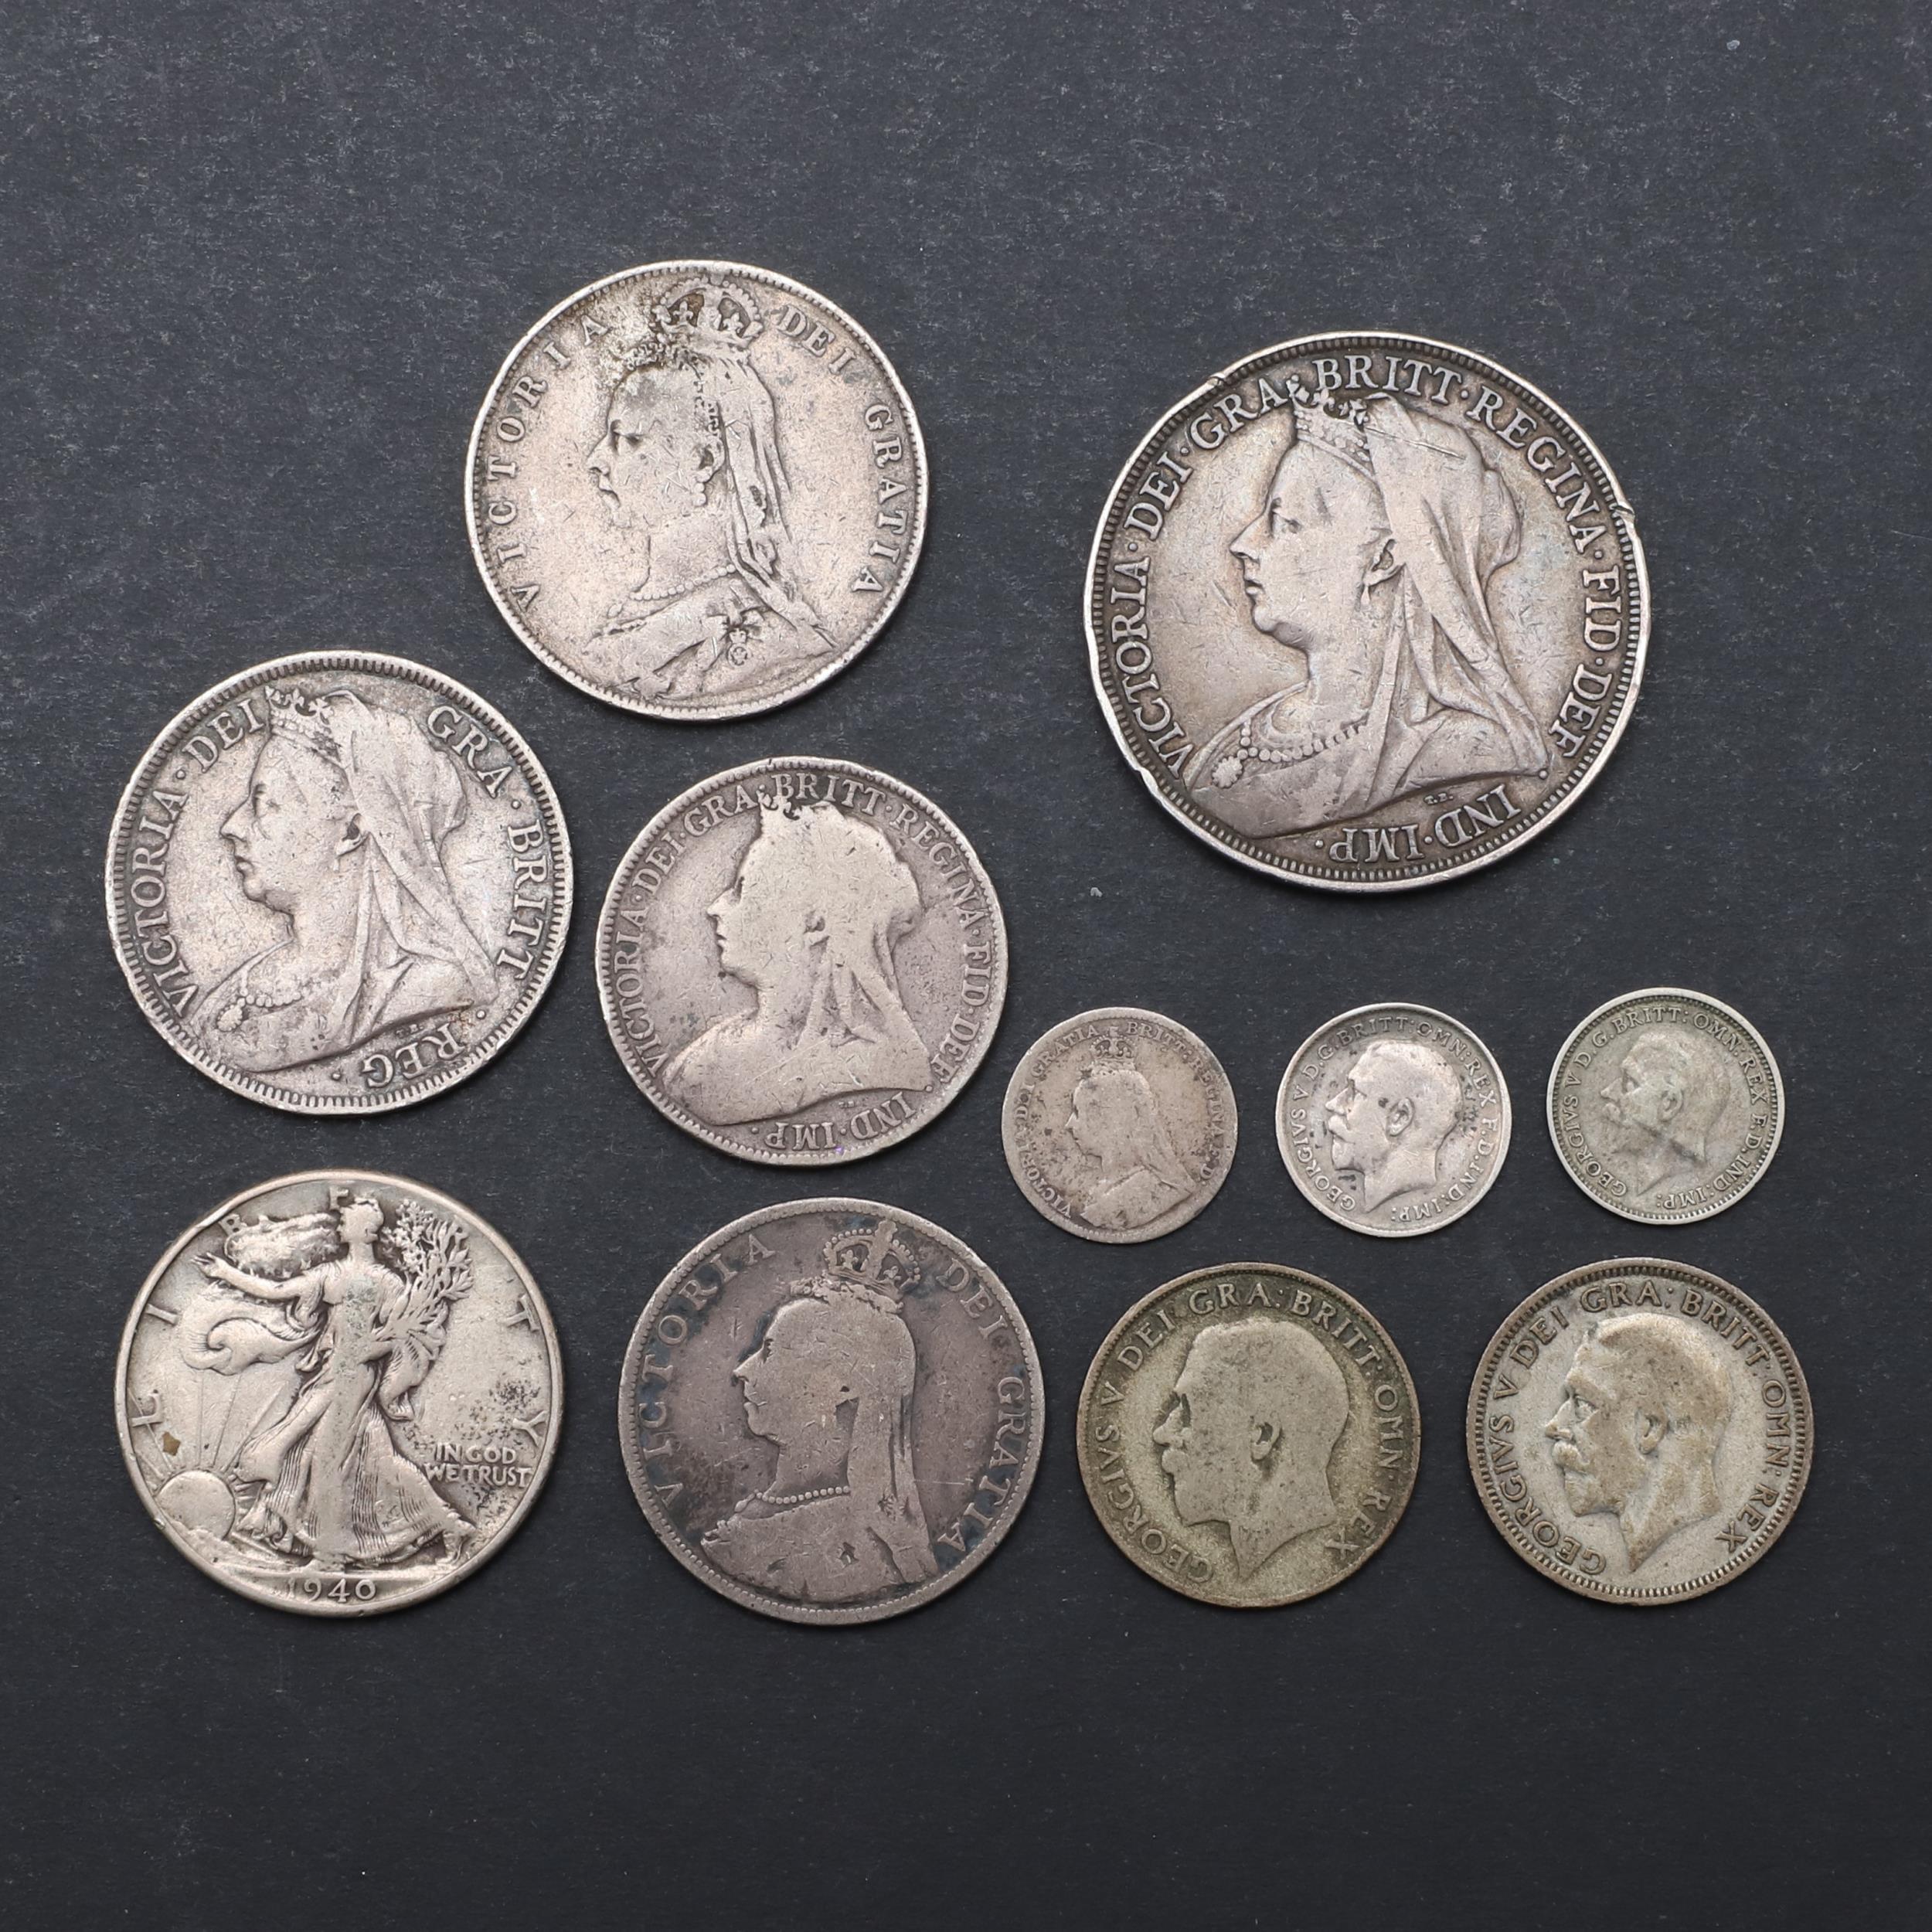 A QUEEN VICTORIA CROWN, 1897 AND A SMALL COLLECTION OF OTHER SILVER.